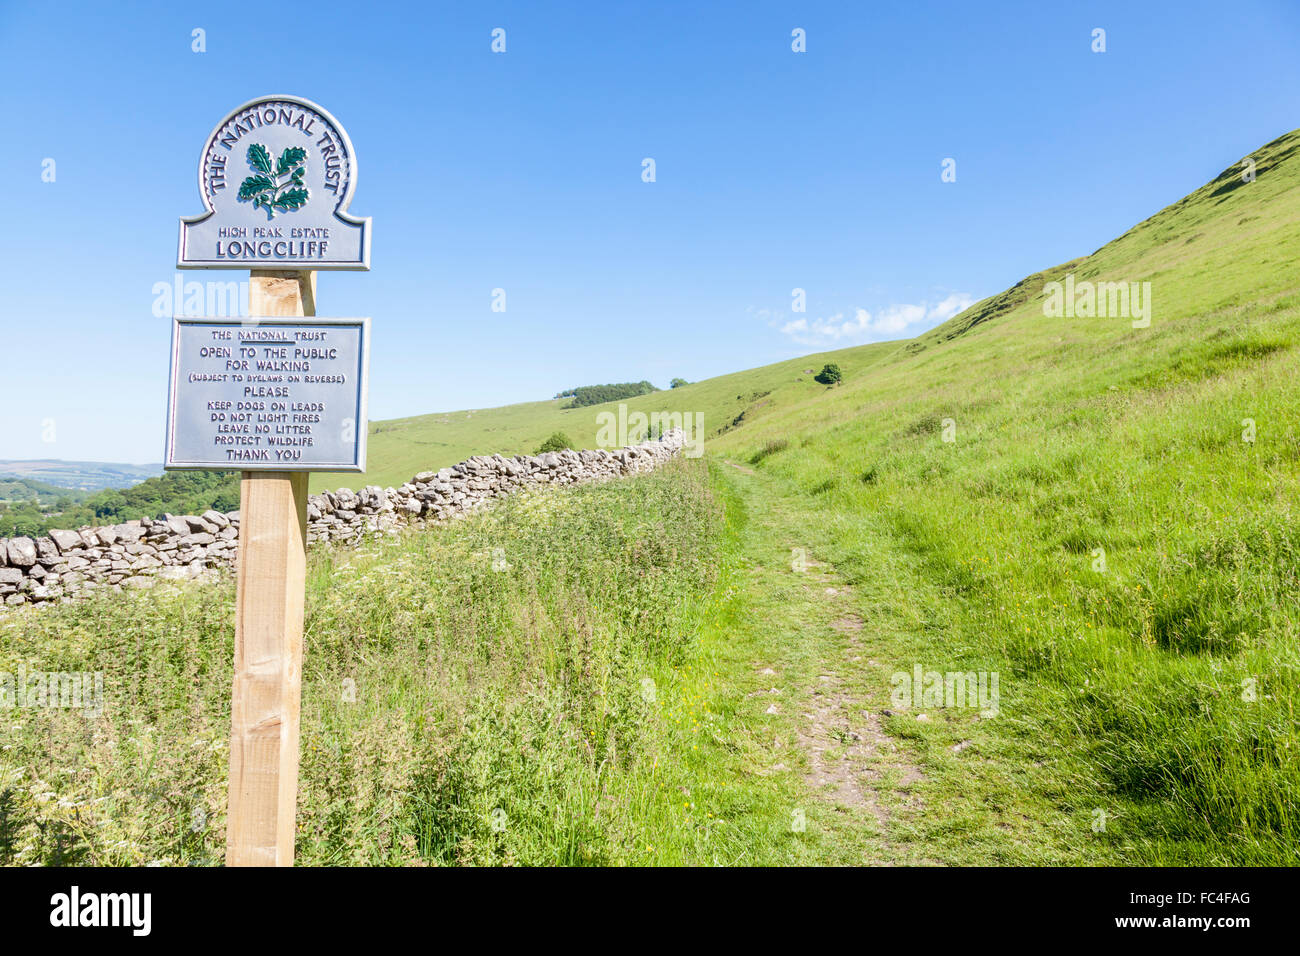 Public footpath and sign for walkers at Long Cliff near Castleton, part of the National Trust High Peak Estate, Derbyshire, Peak District, England, UK Stock Photo